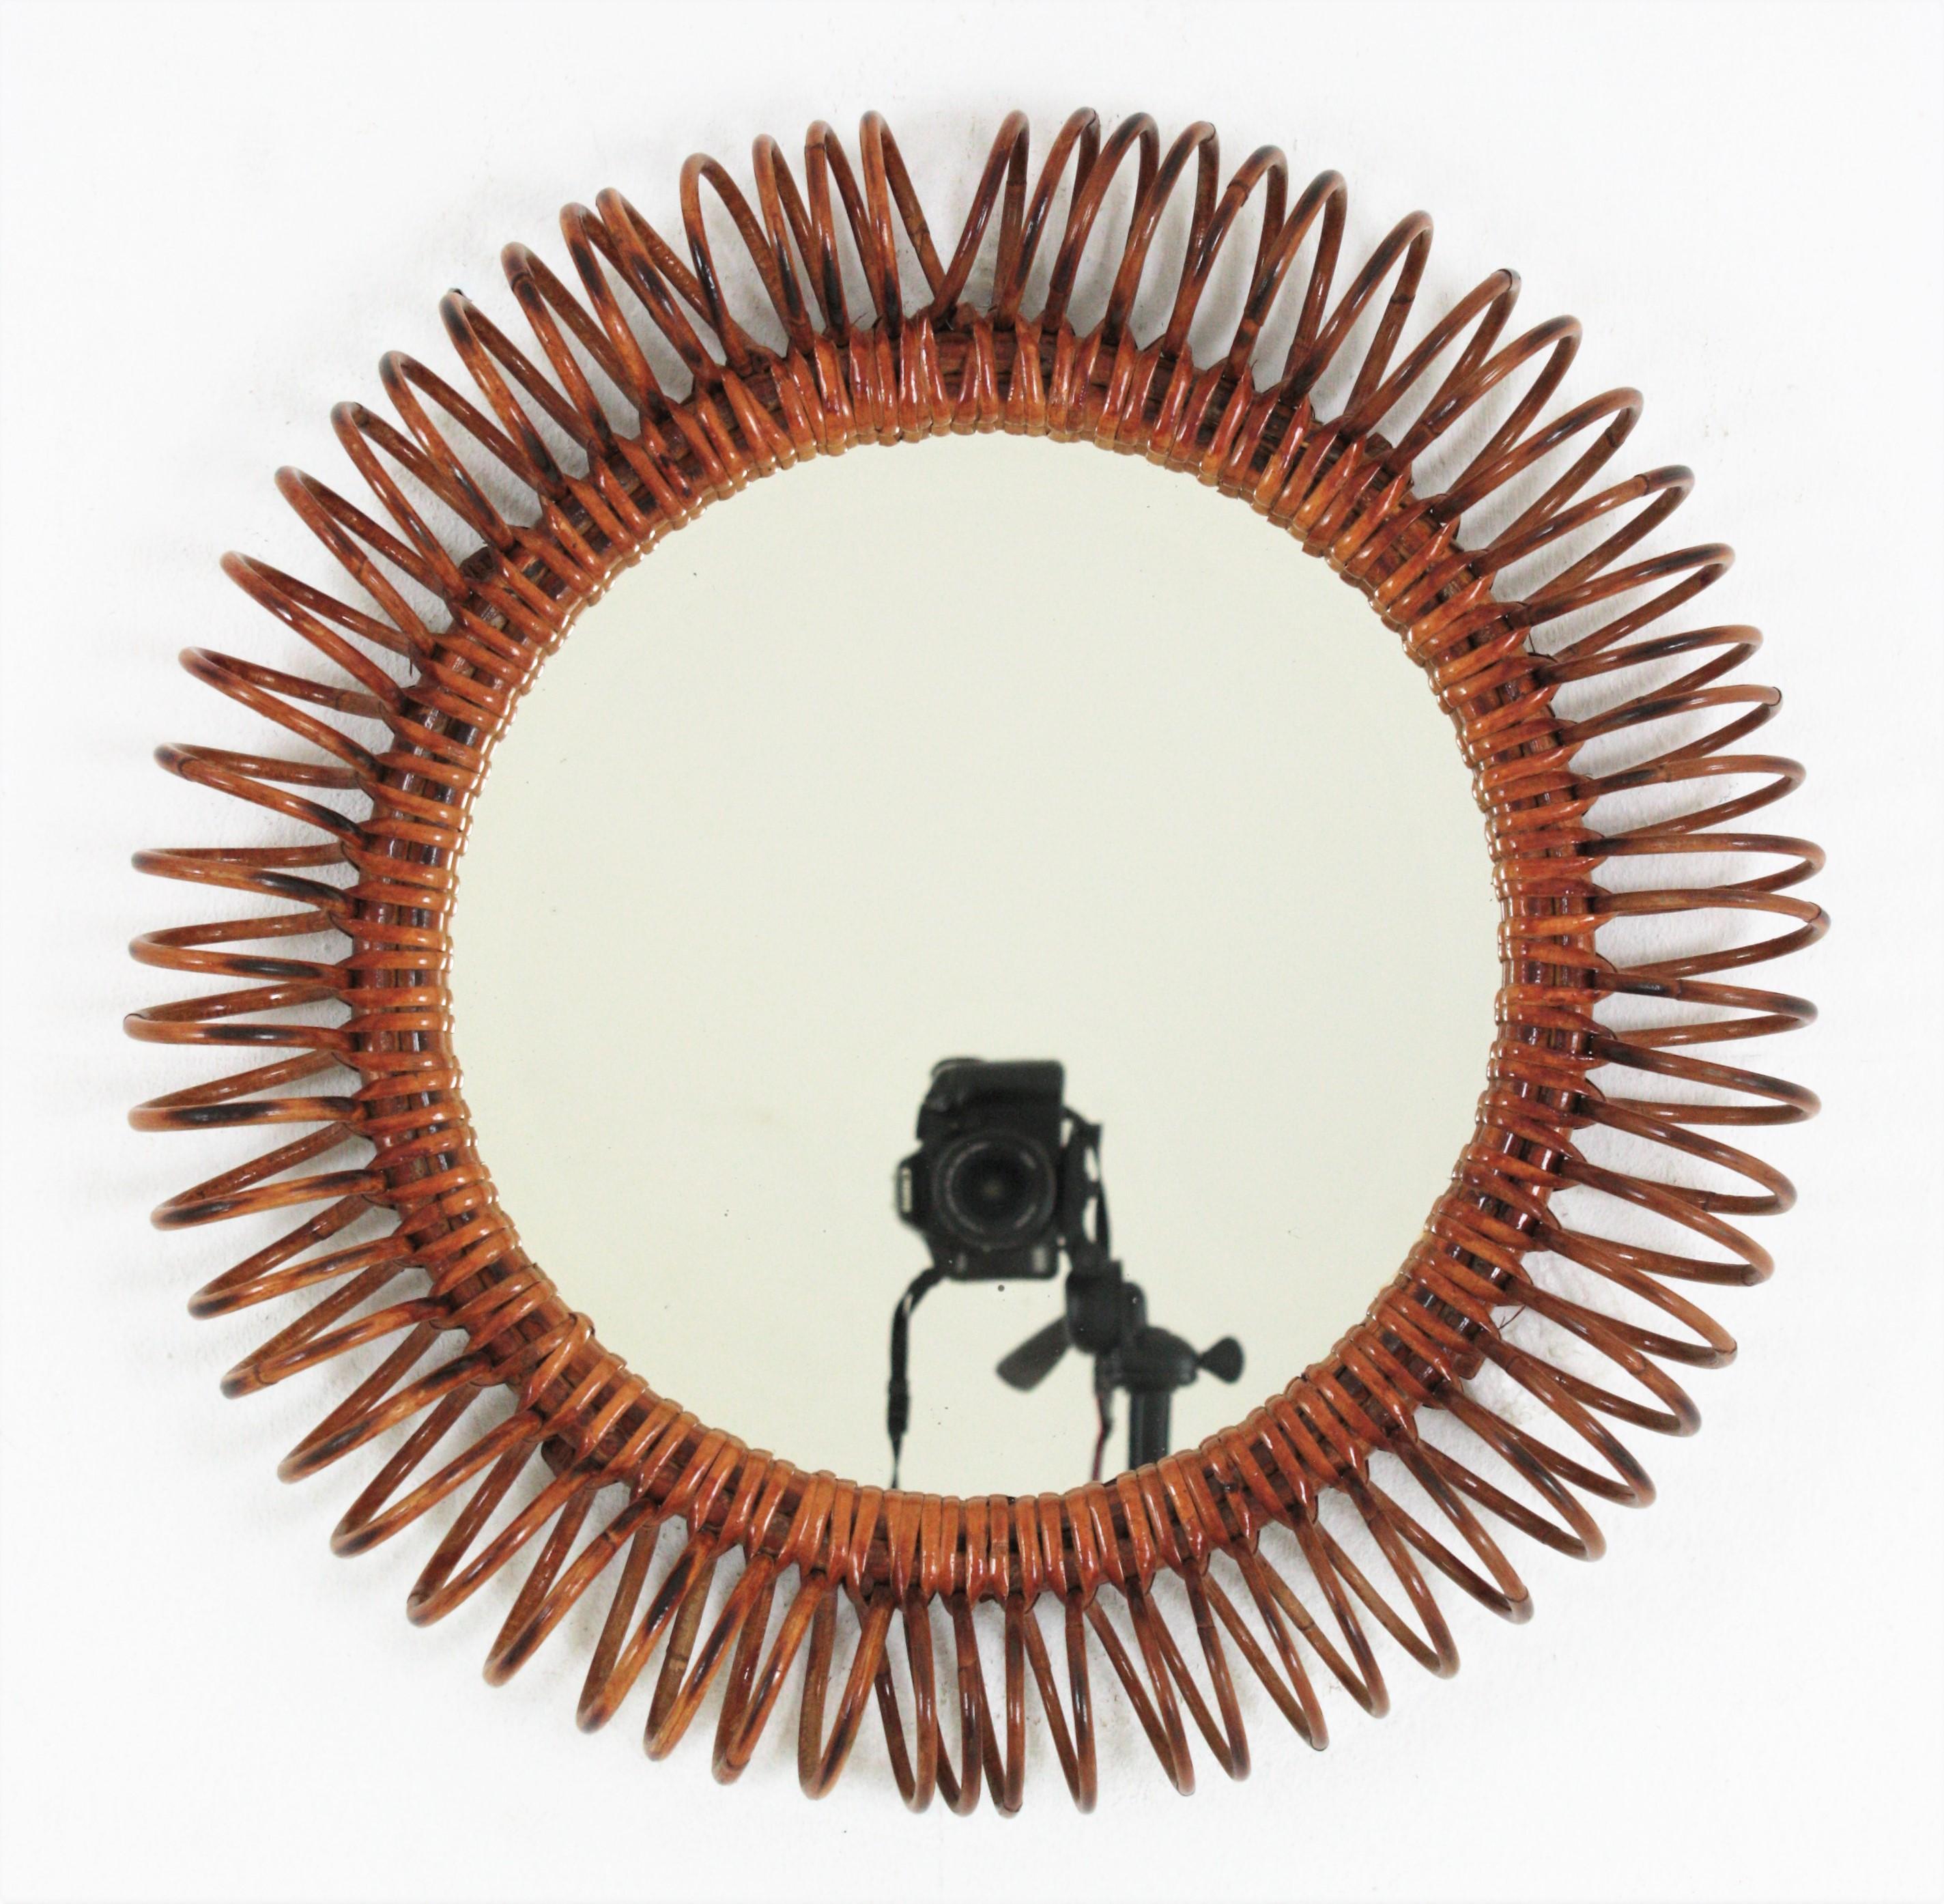 Italian Mid-Century Modern mirror in rattan attributed to Franco Albini. Italy, 1950s
This cool round mirror features a rattan woven spiral frame surrounding the central glass.
Place it alone or as a part of a mirror wall composition with other